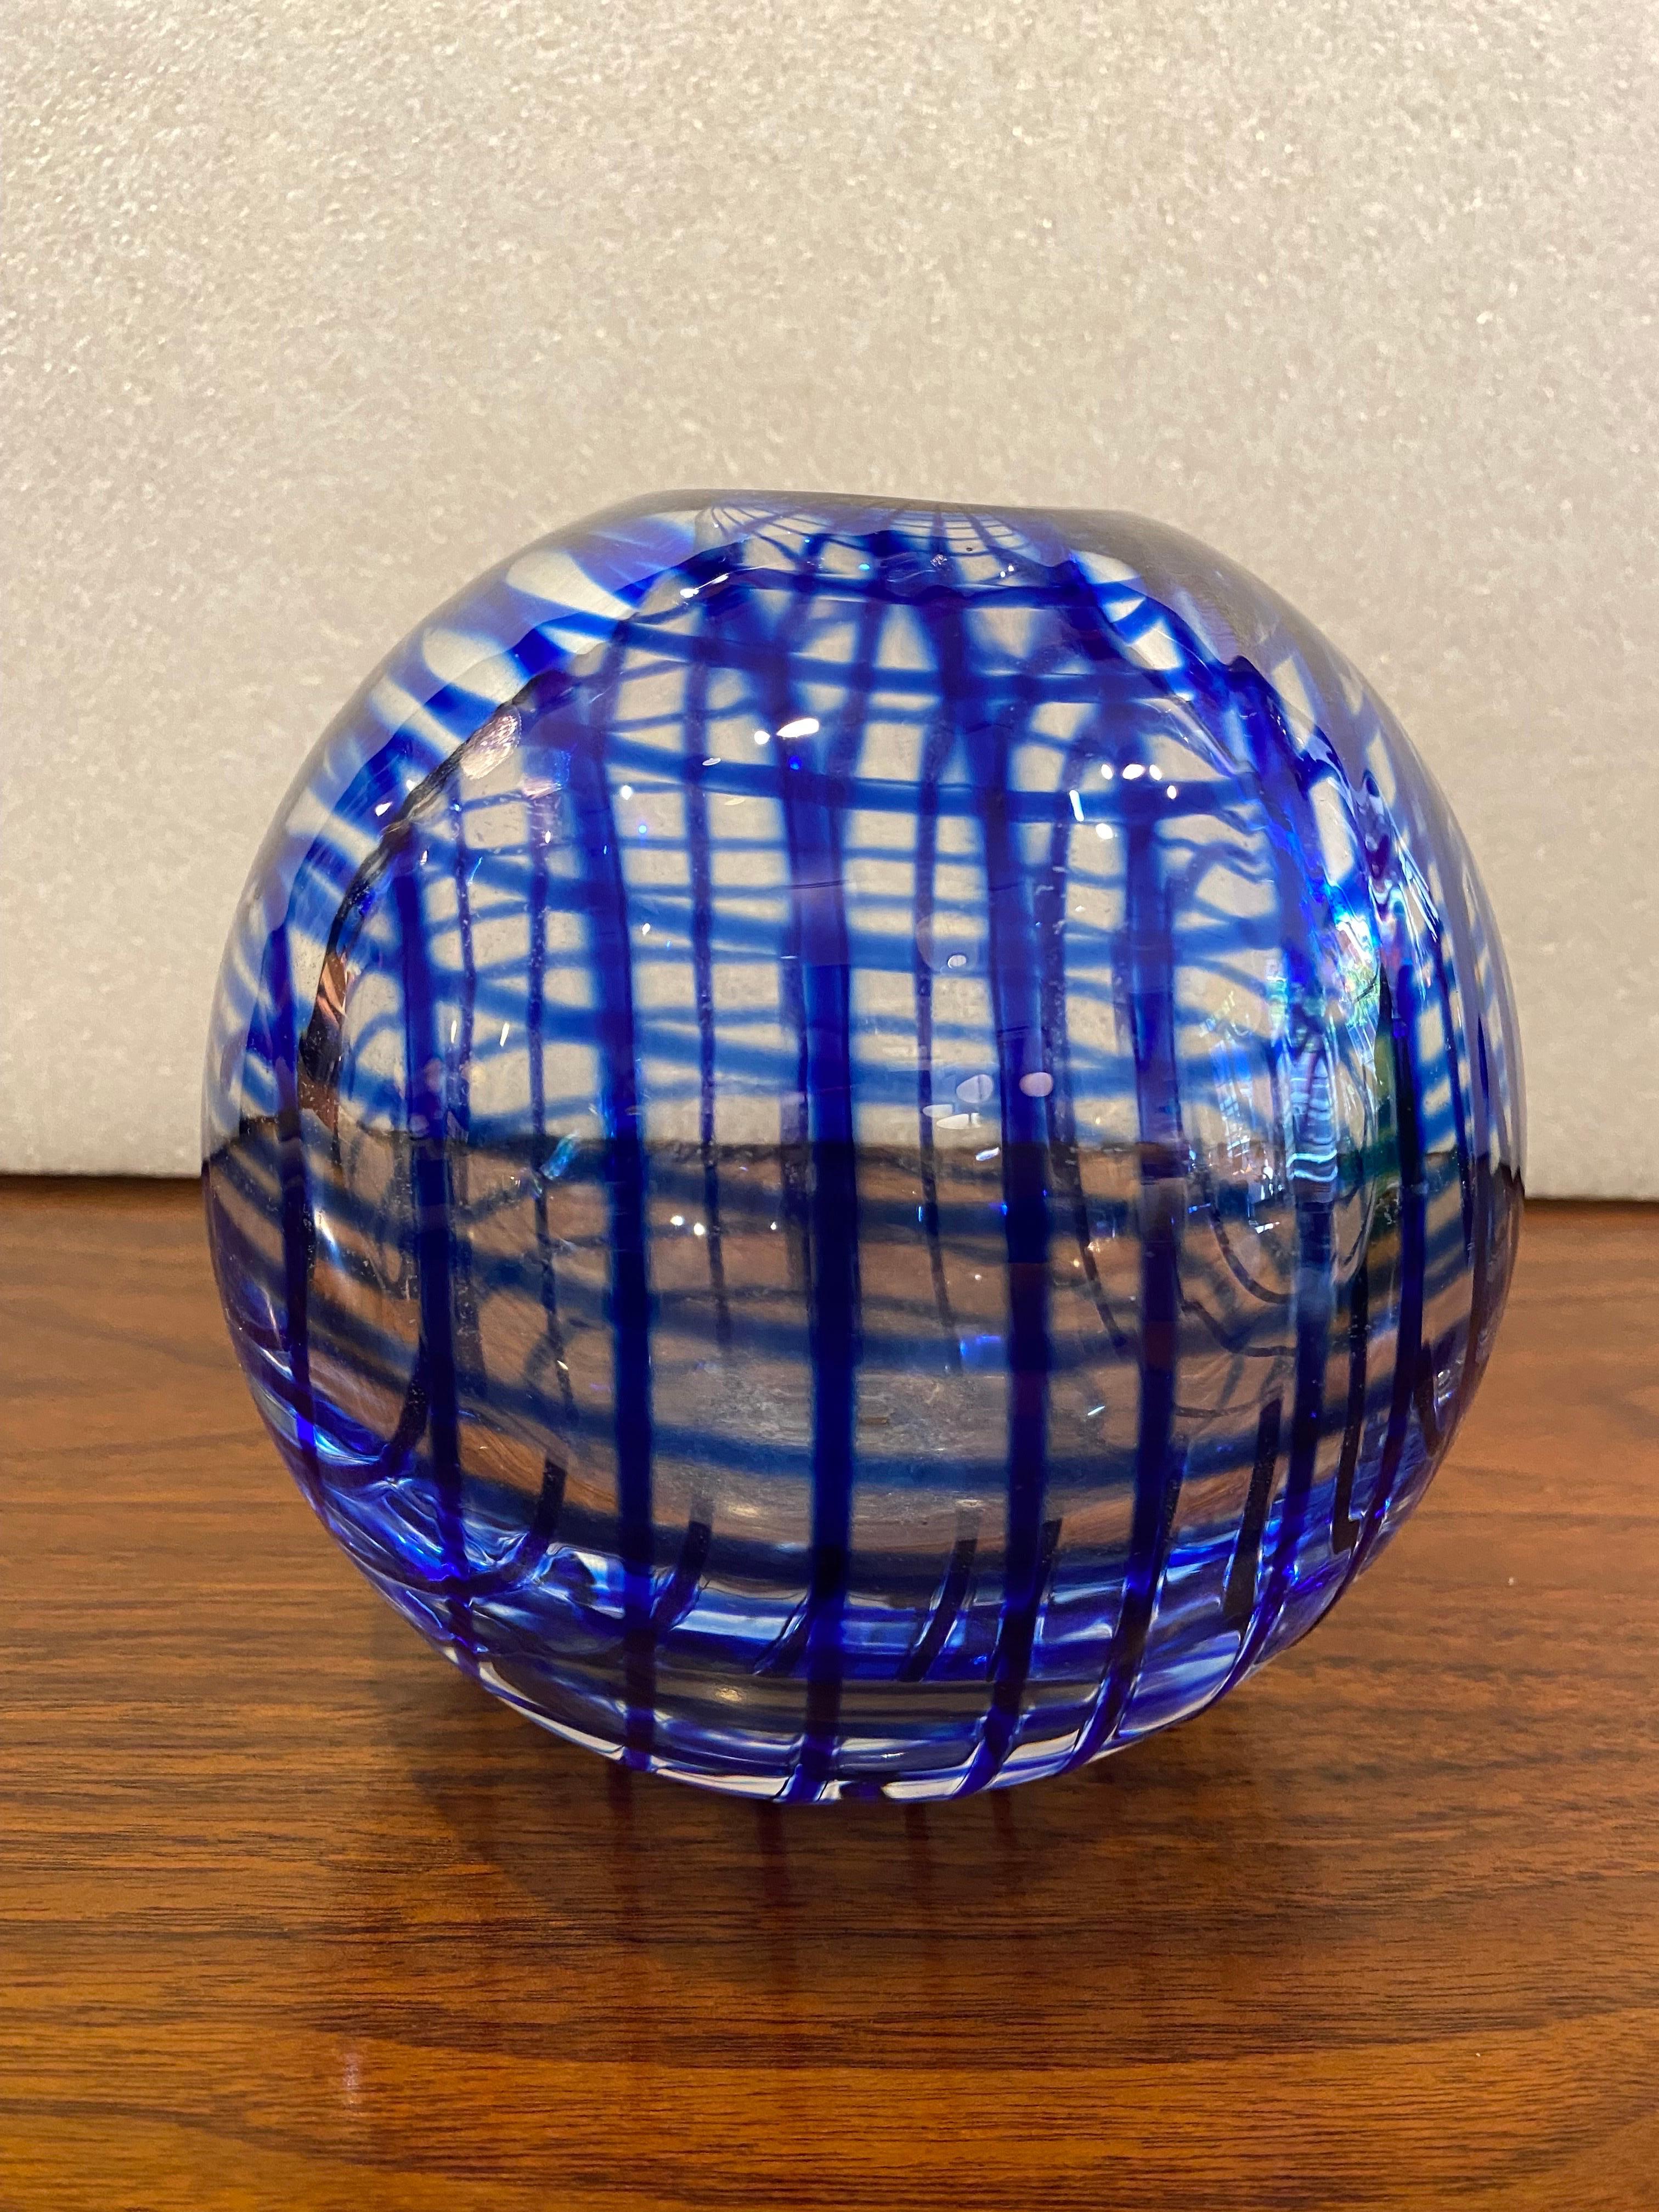 Czech  Swirl Round Ball Vase designed by Jan Kocavik, 2004 In Good Condition For Sale In Philadelphia, PA